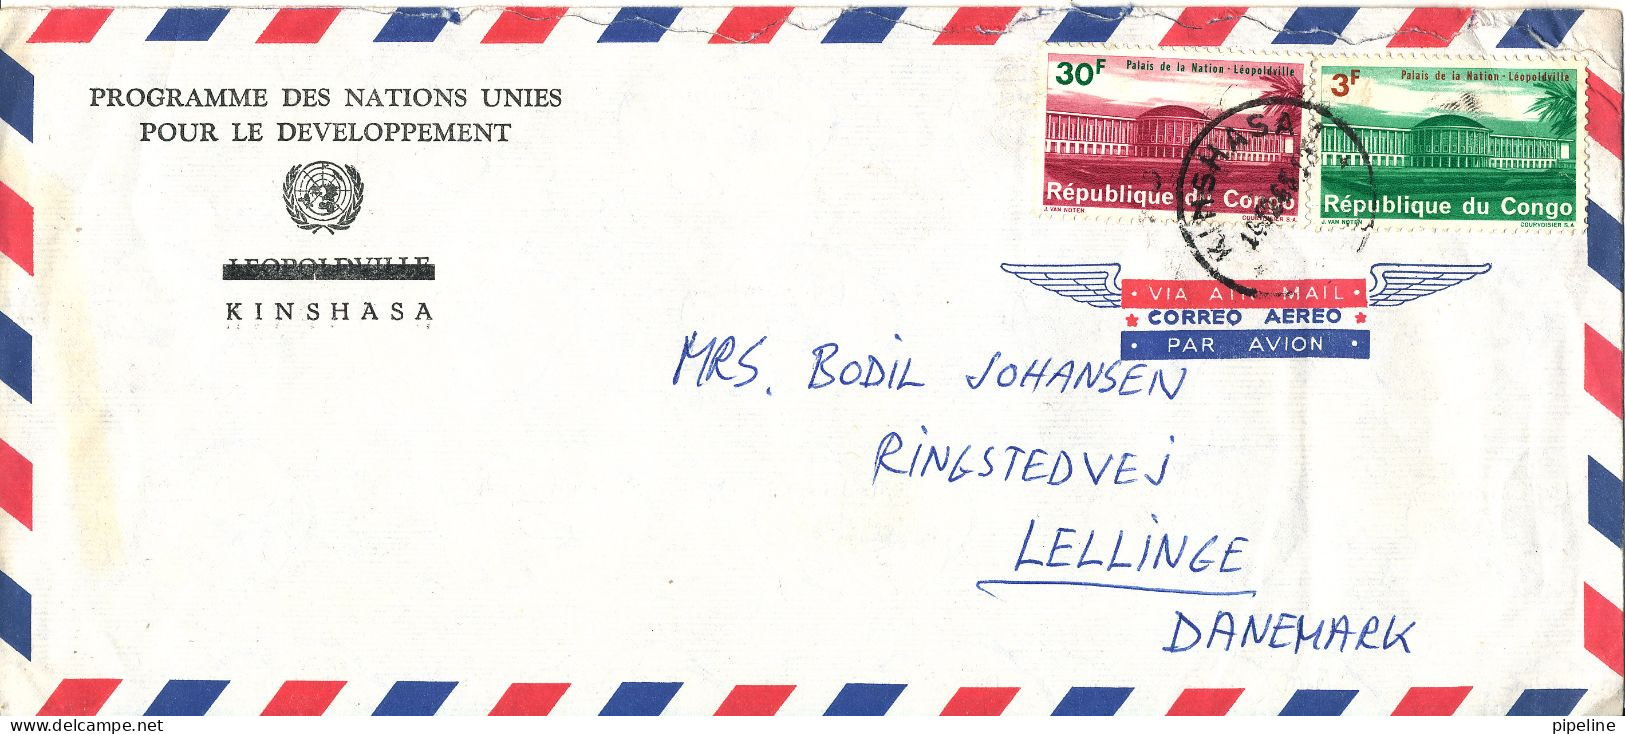 Congo Kinshasa Air Mail Cover Sent To Denmark 14-12-1965 The Cover Is Damaged At The Top By Opening - Covers & Documents